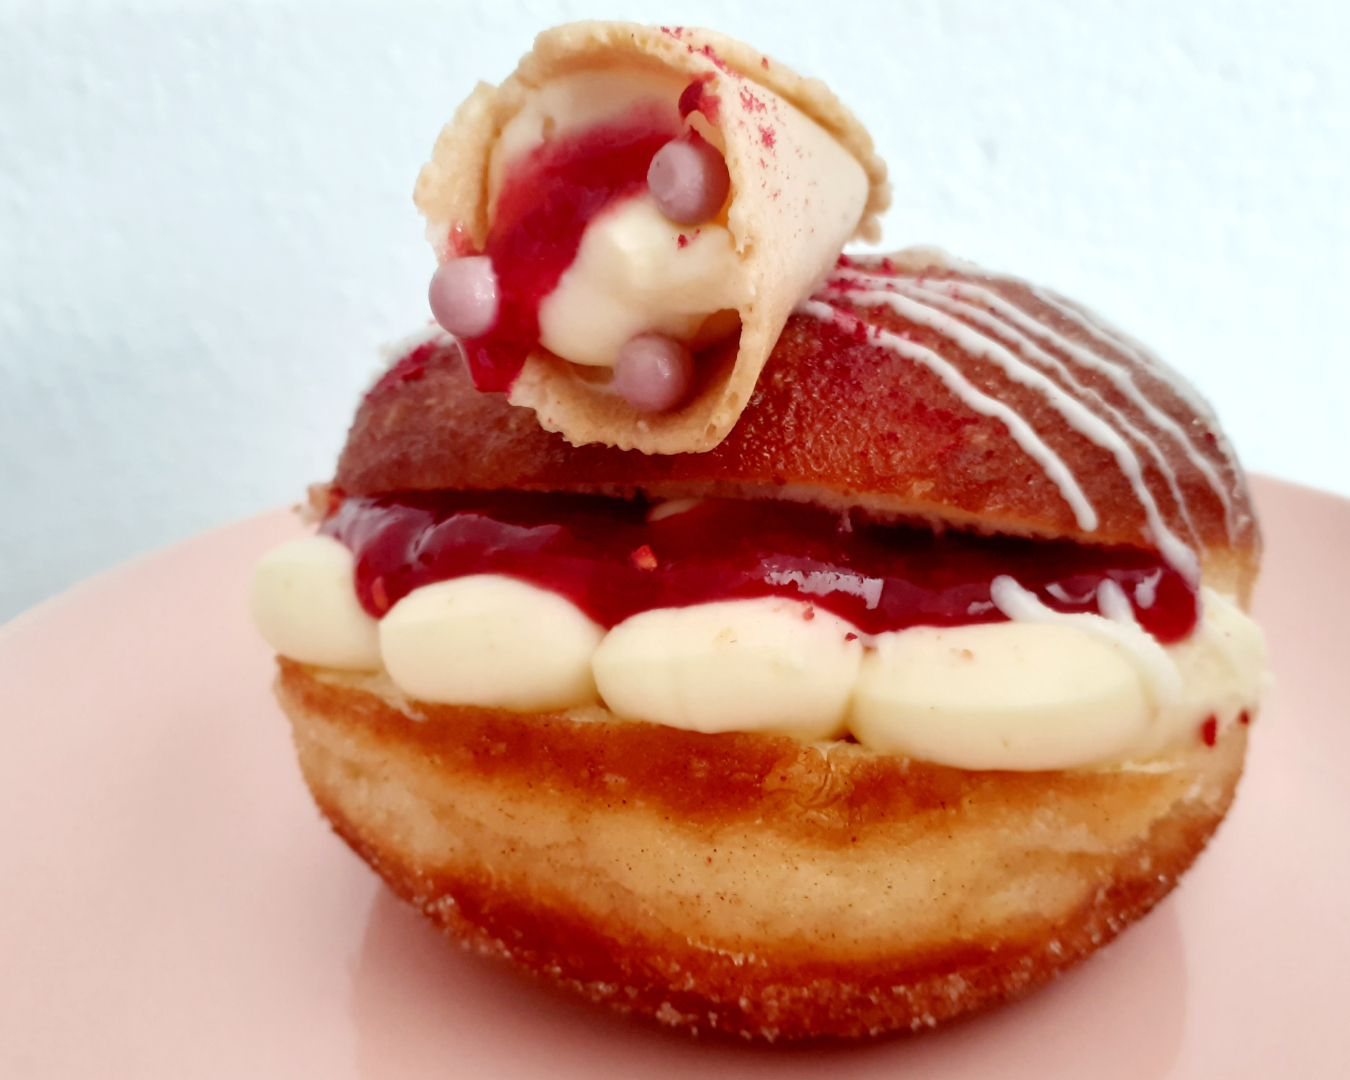 A delicious looking doughnut filled with cream and berry sauce, topped with a tuile containing more cream and berry sauce!